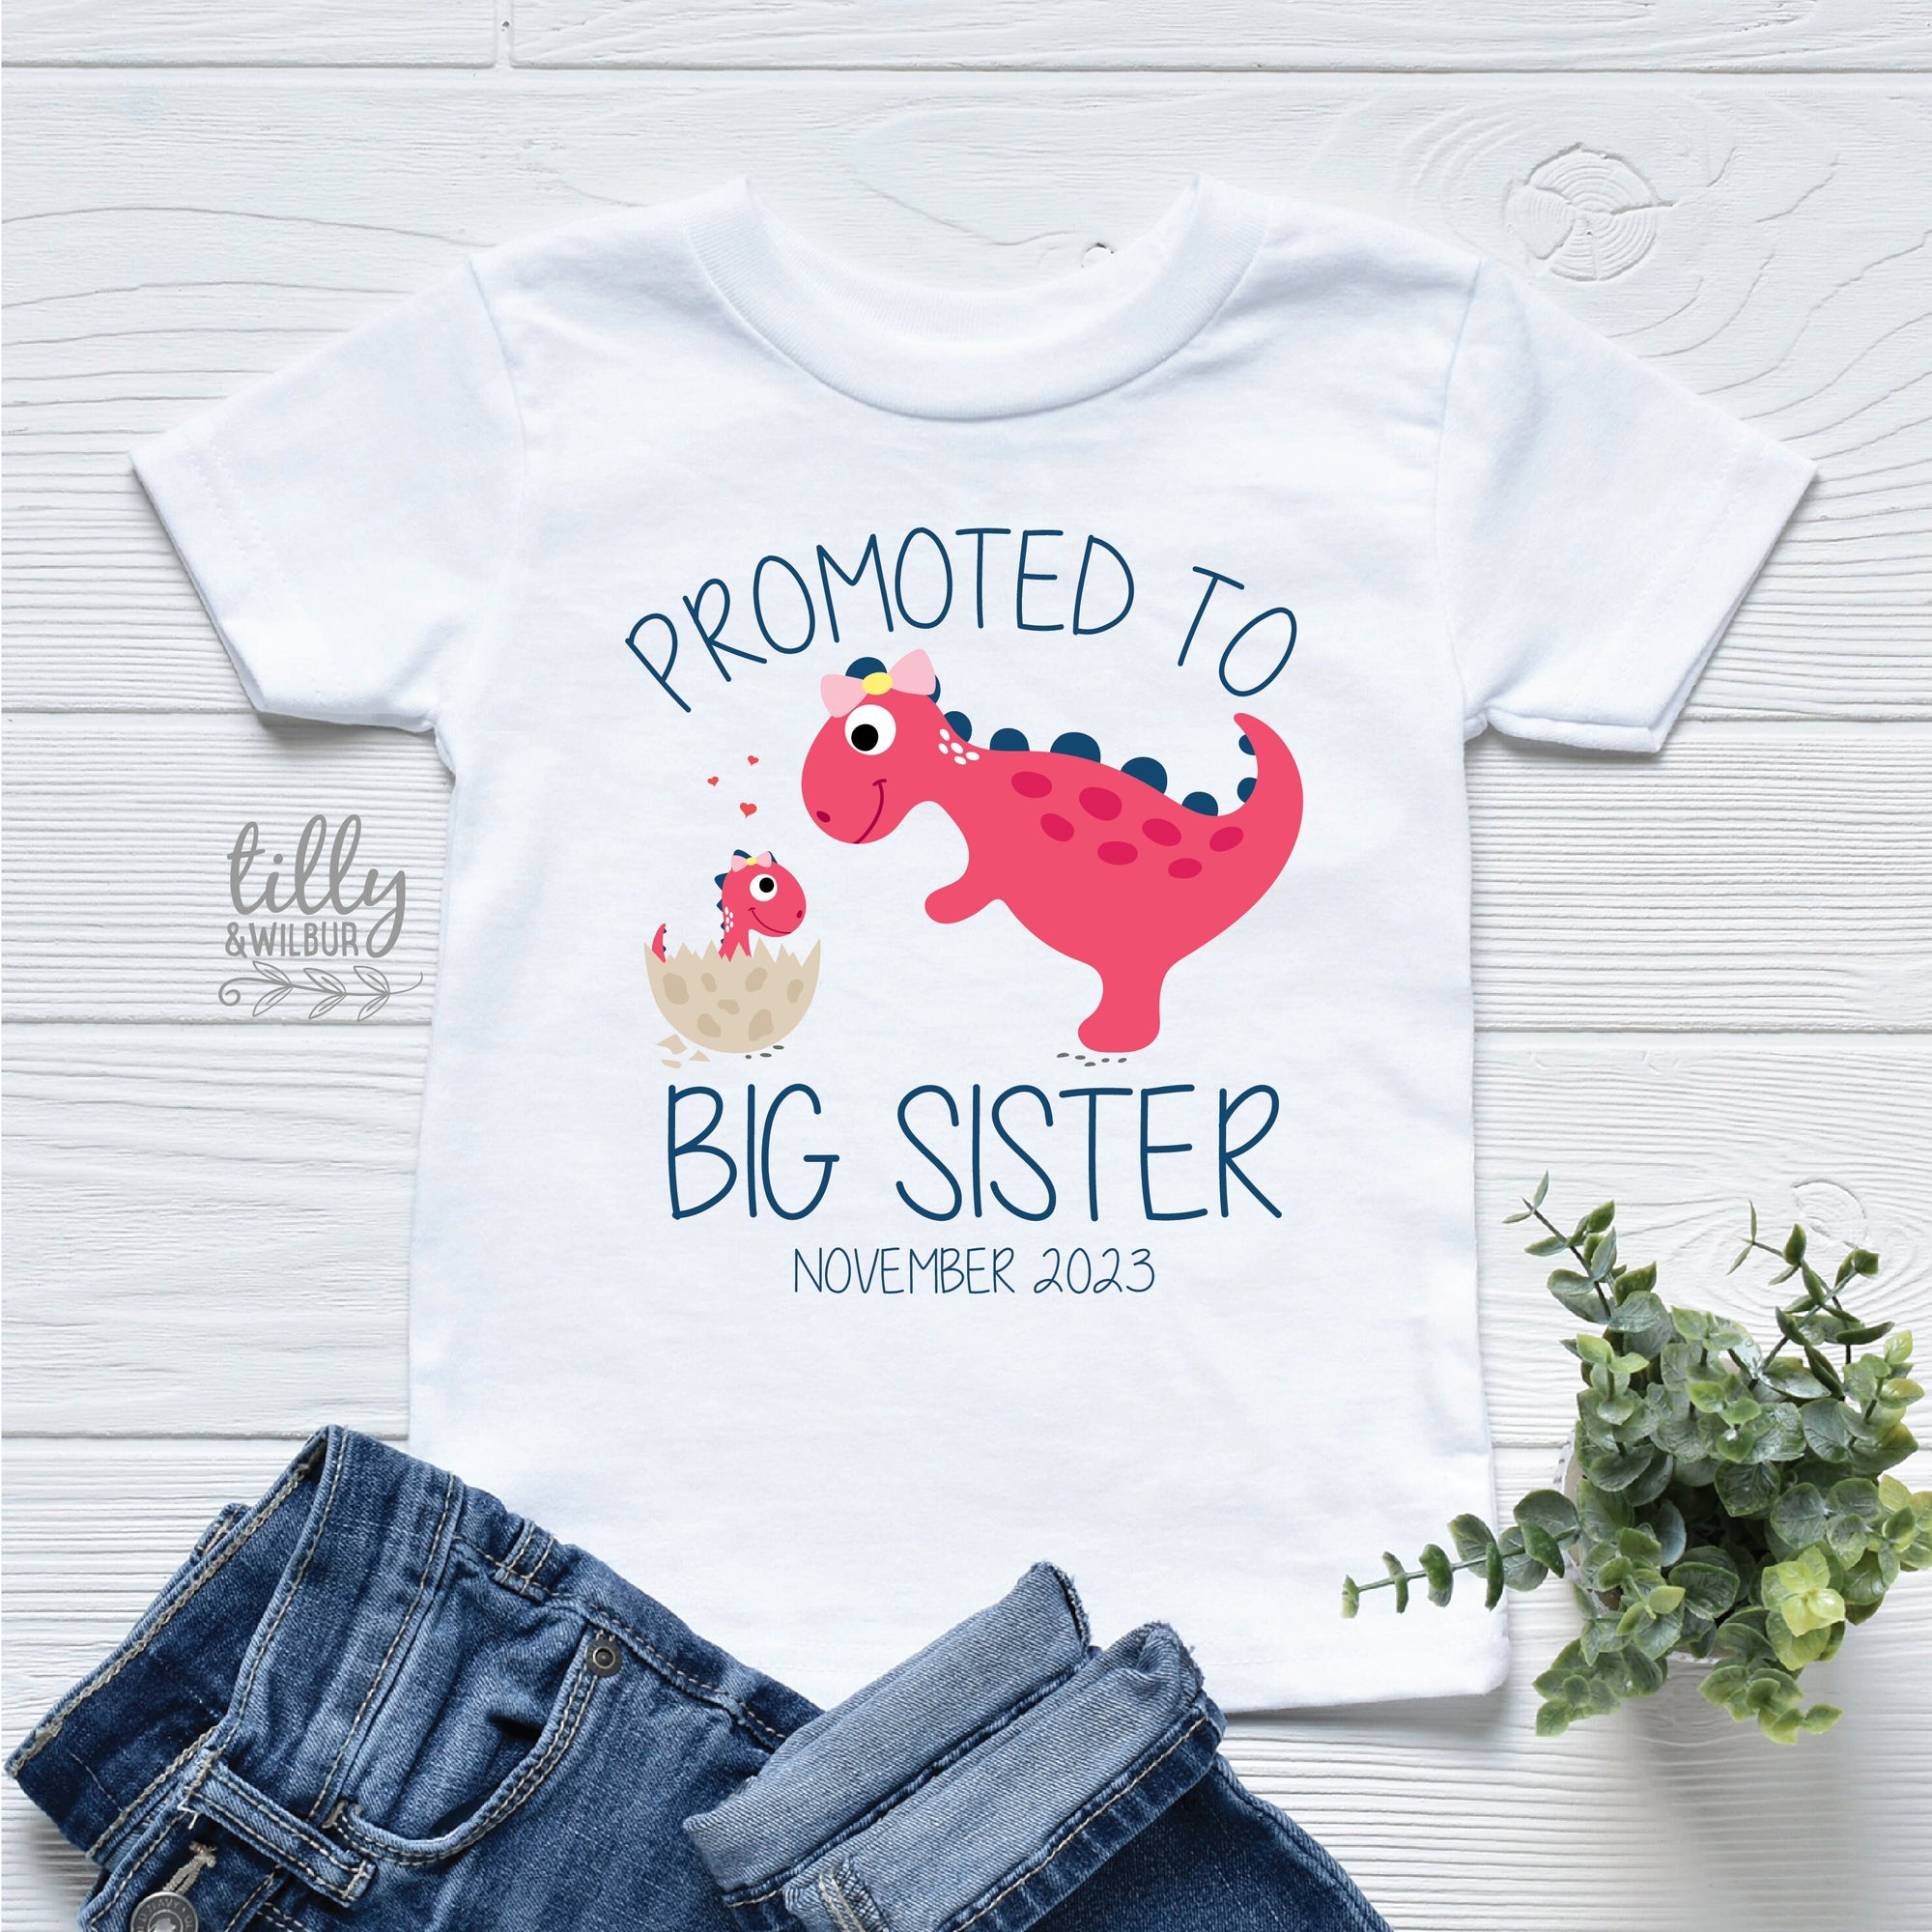 Big Sister T-Shirt, Promoted To Big Sister T-Shirt, Big Sister Shirt, I'm Going To Be A Big Sister, Pregnancy Announcement, Dinosaur Tee